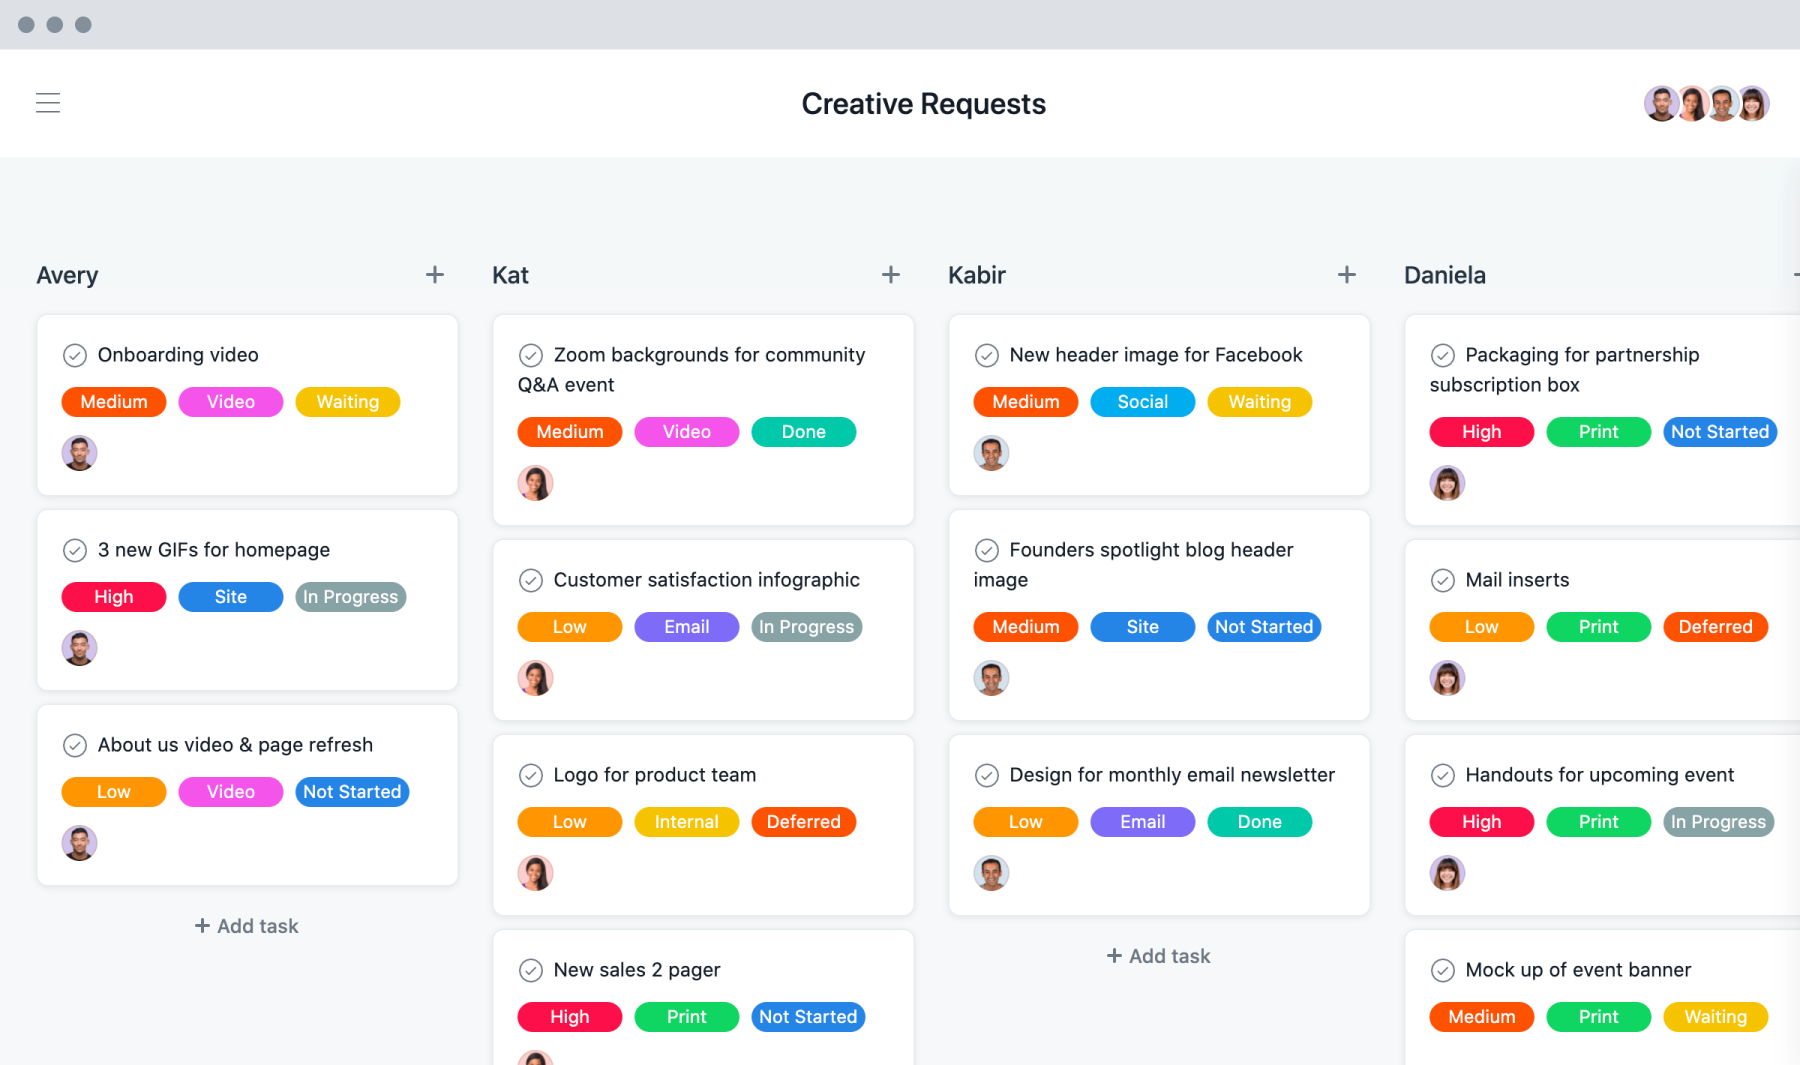 [Product UI] Creative Requests Kanban board example (Boards)